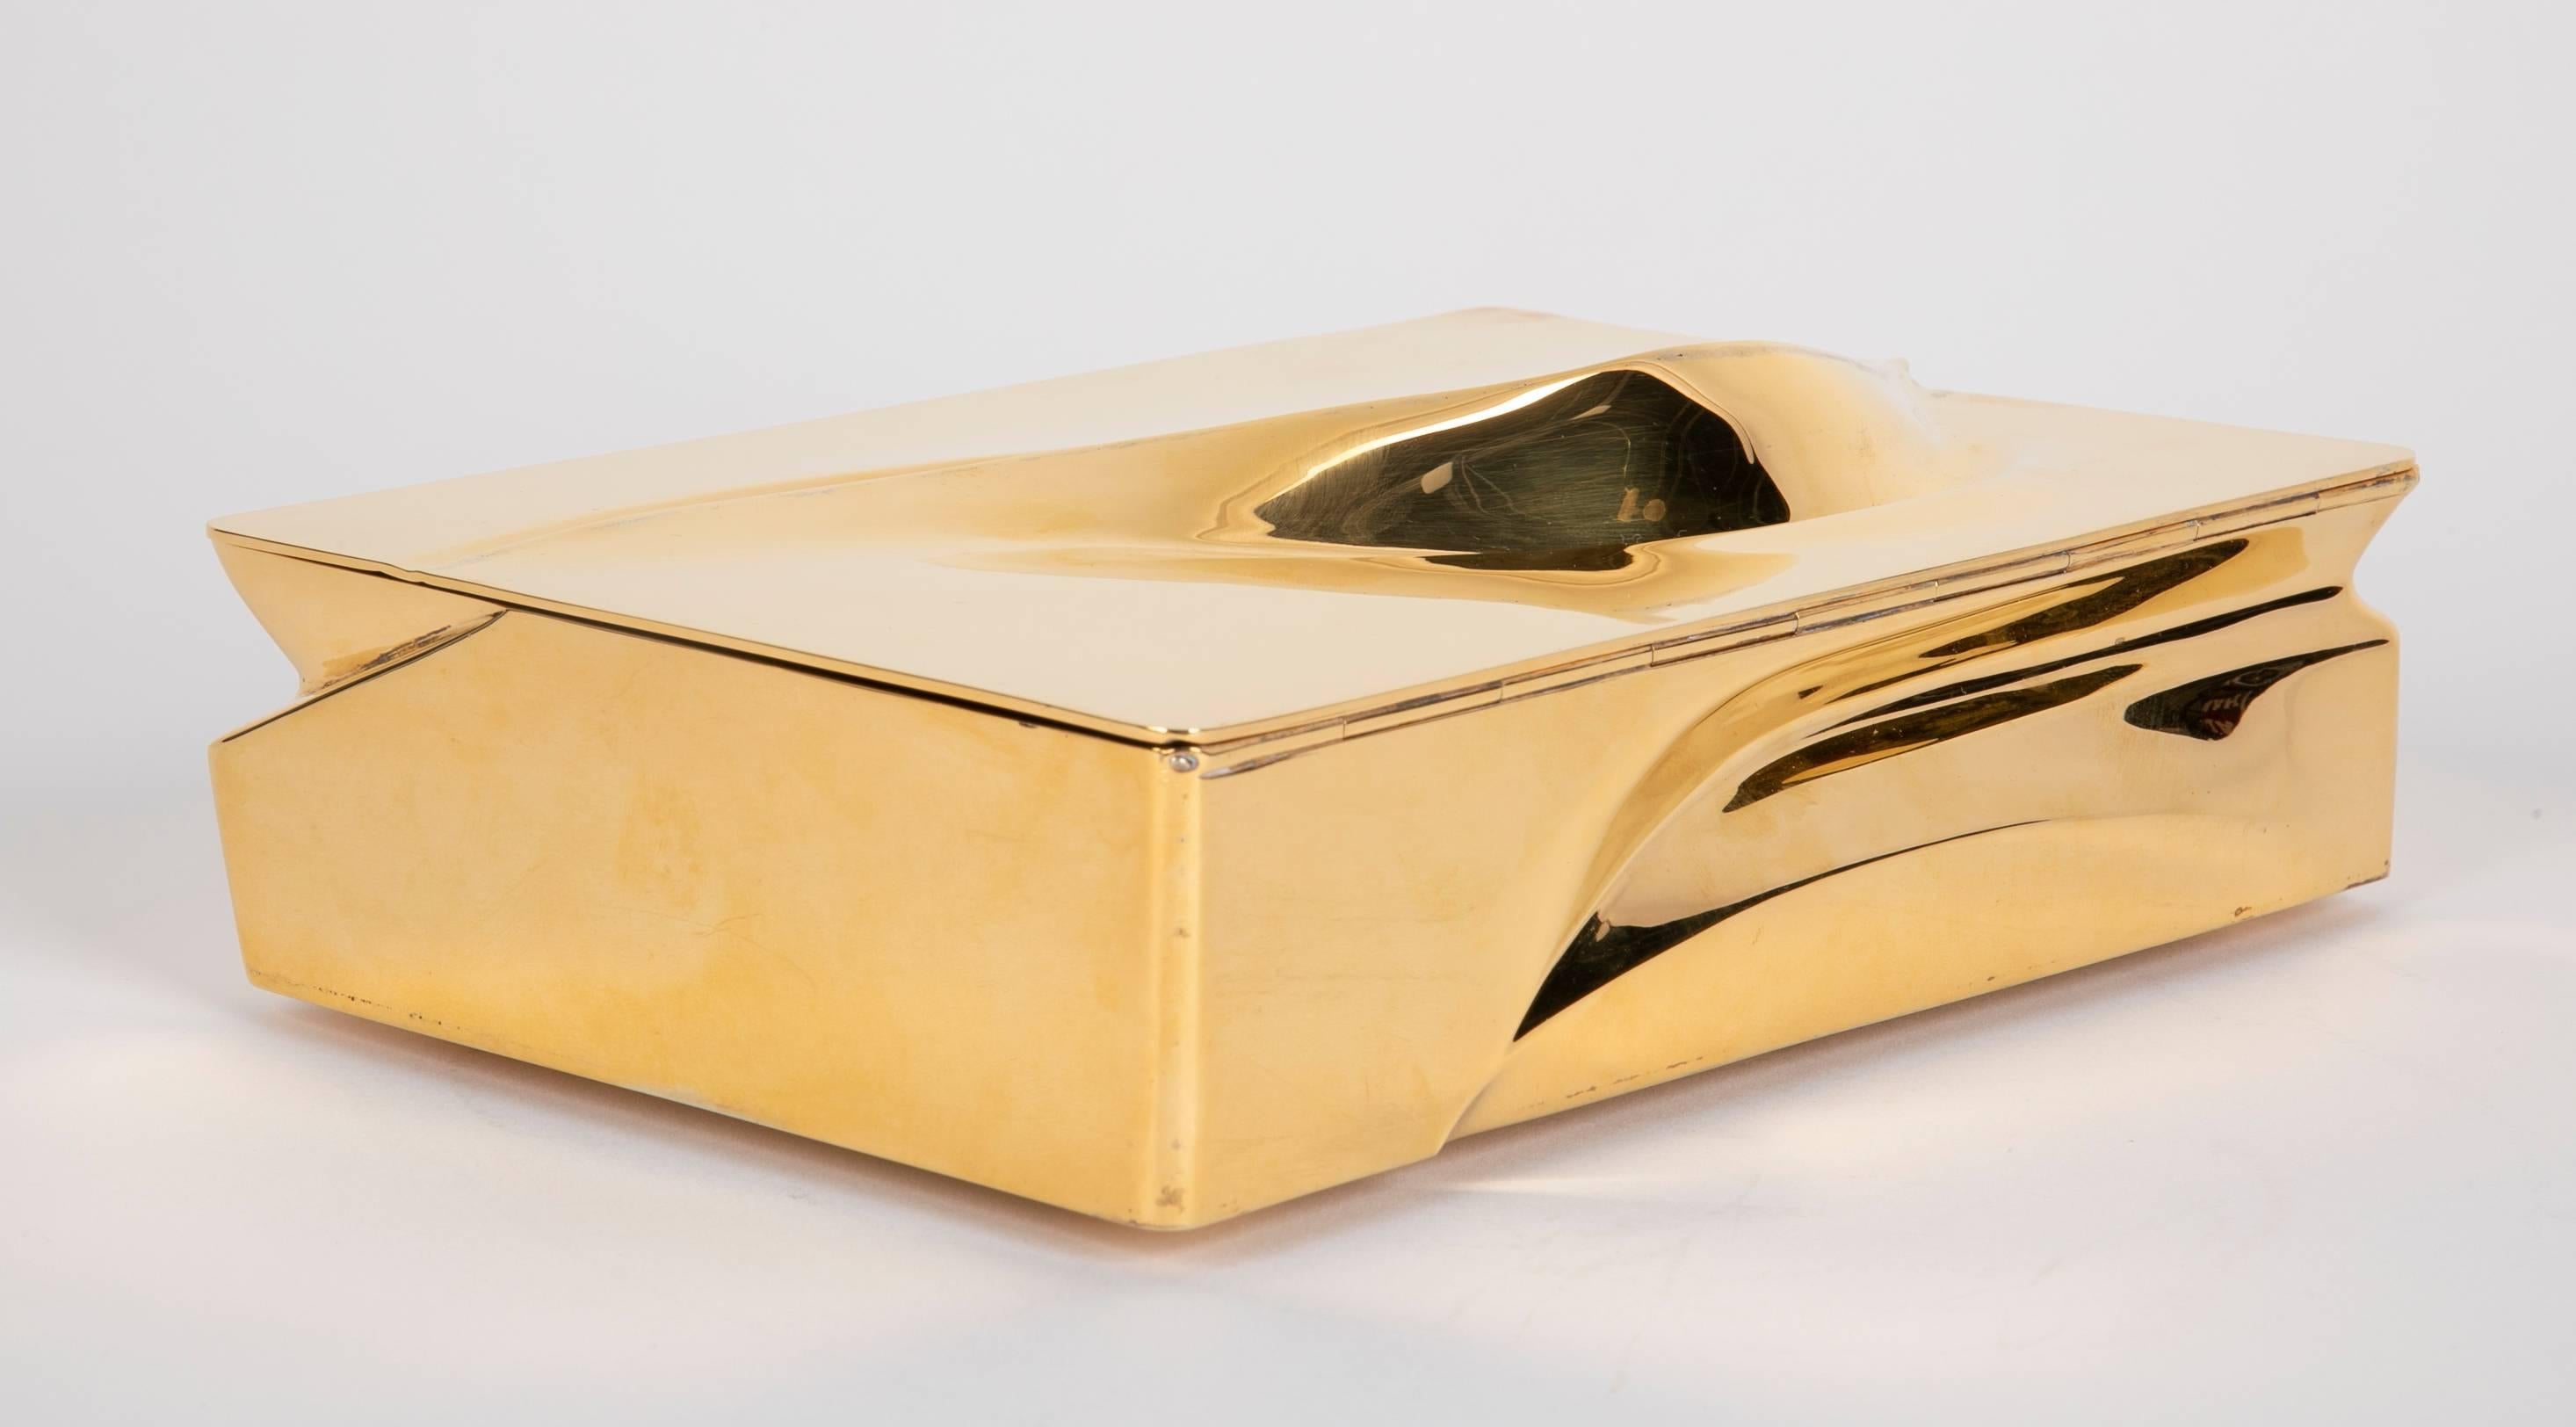 A vermeil (gilt sterling silver) Mnemos 02 jewelry box; segmented in organic forms with satinwood and suede compartments. Designed and produced in 2008 by Asymptote for Meta.